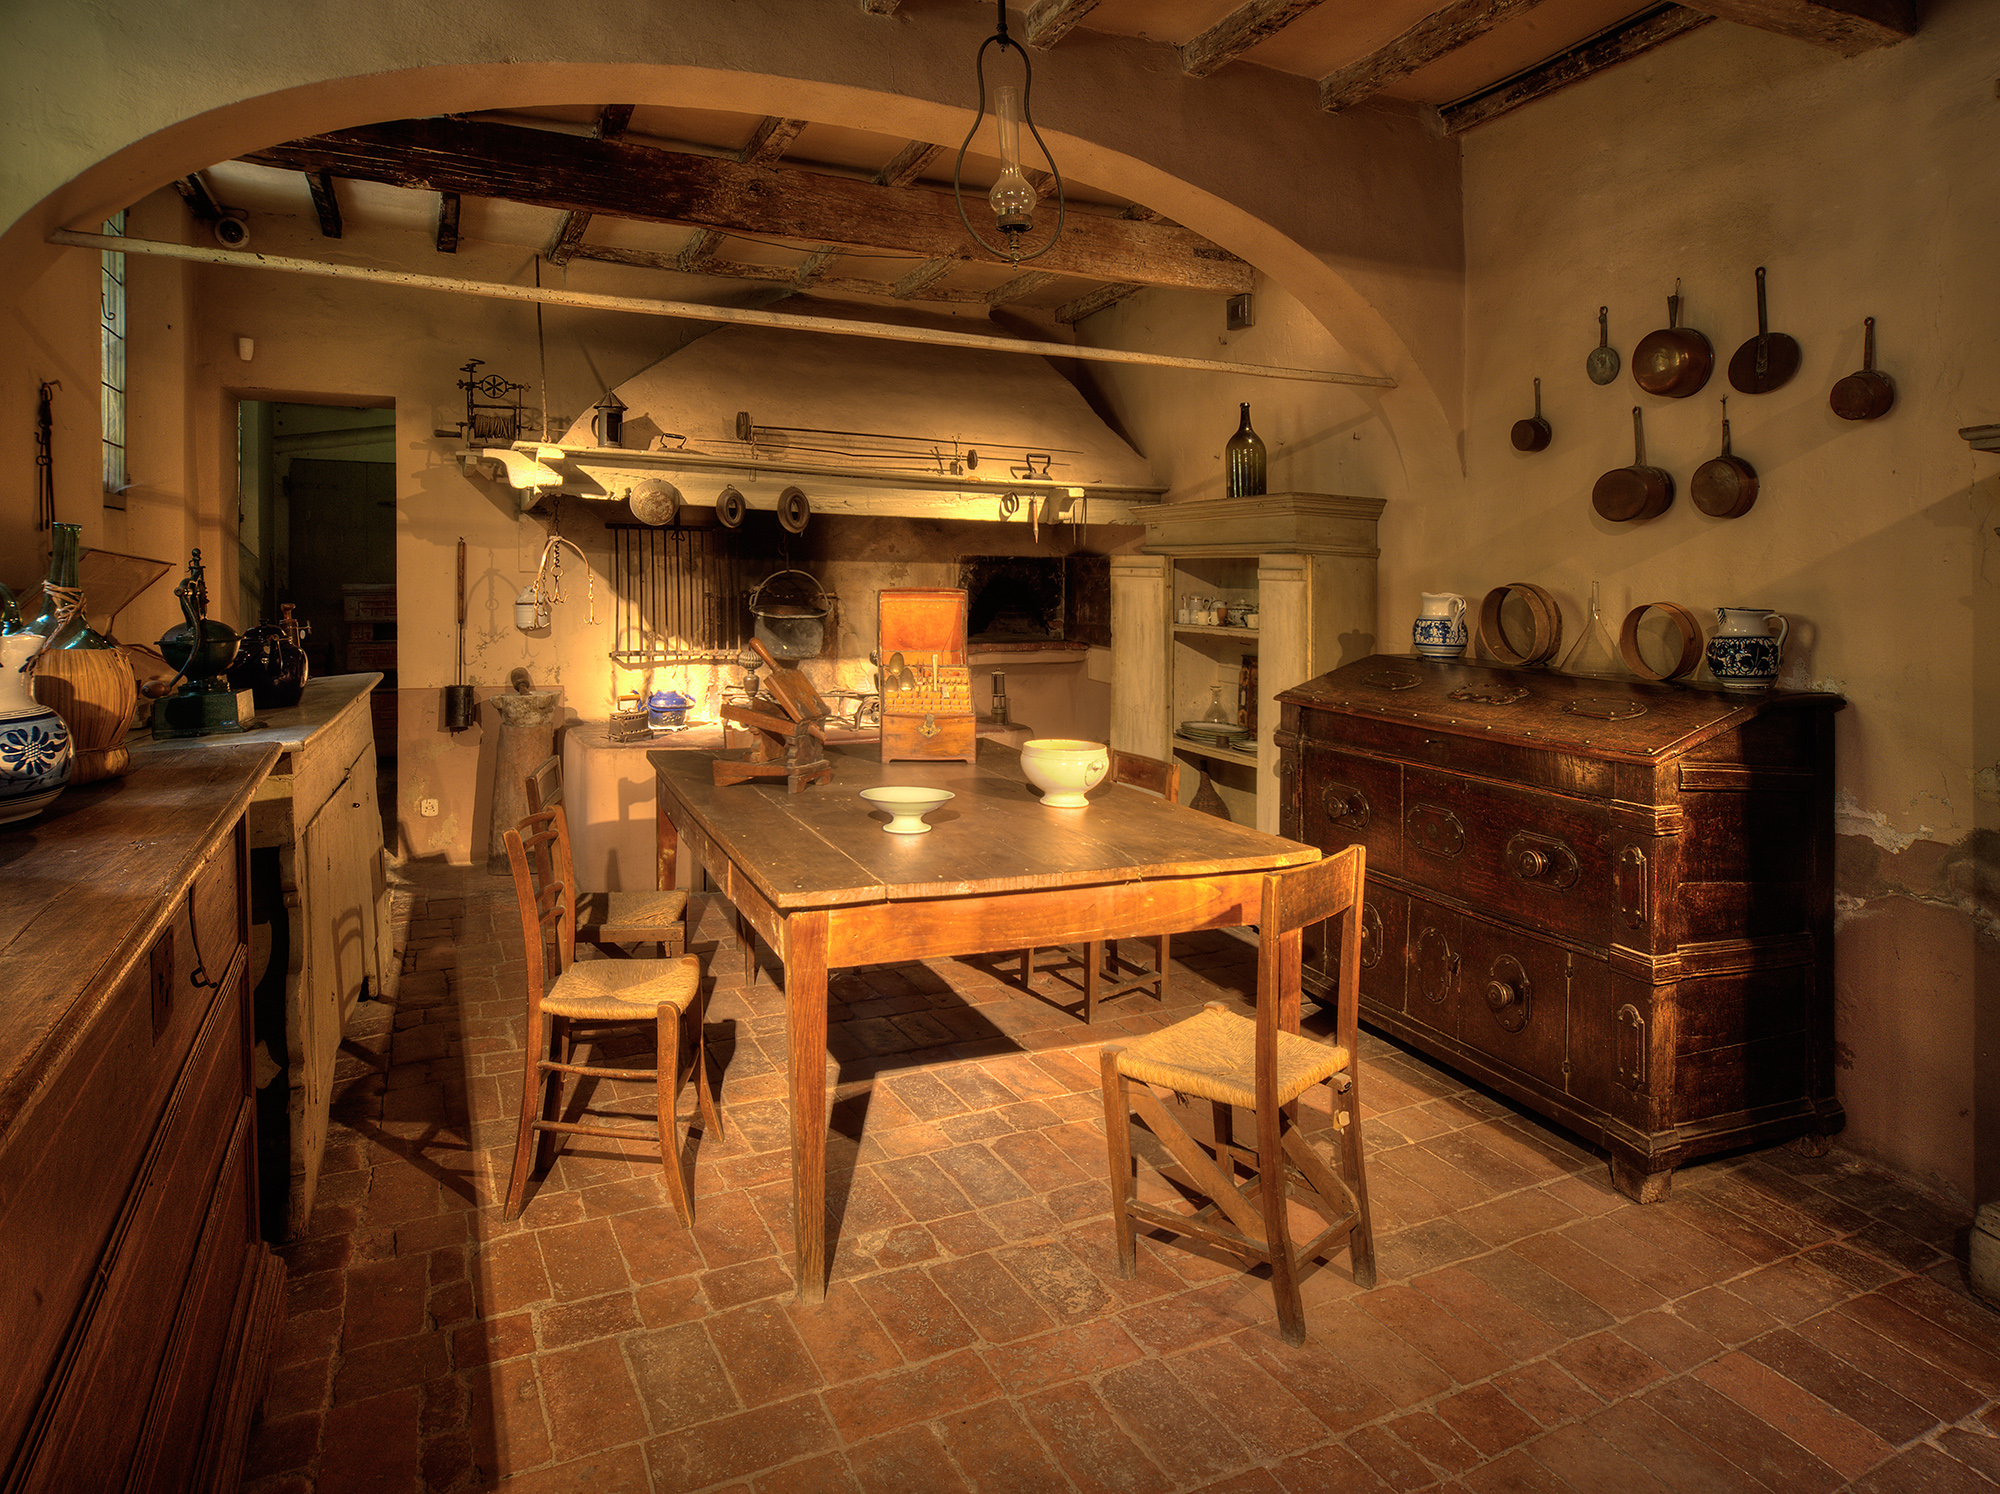 Photo archives Civic Museums of Imola picture of the event: Imola's Civic Museums: the historical kitchen of Palazzo Tozzoni.